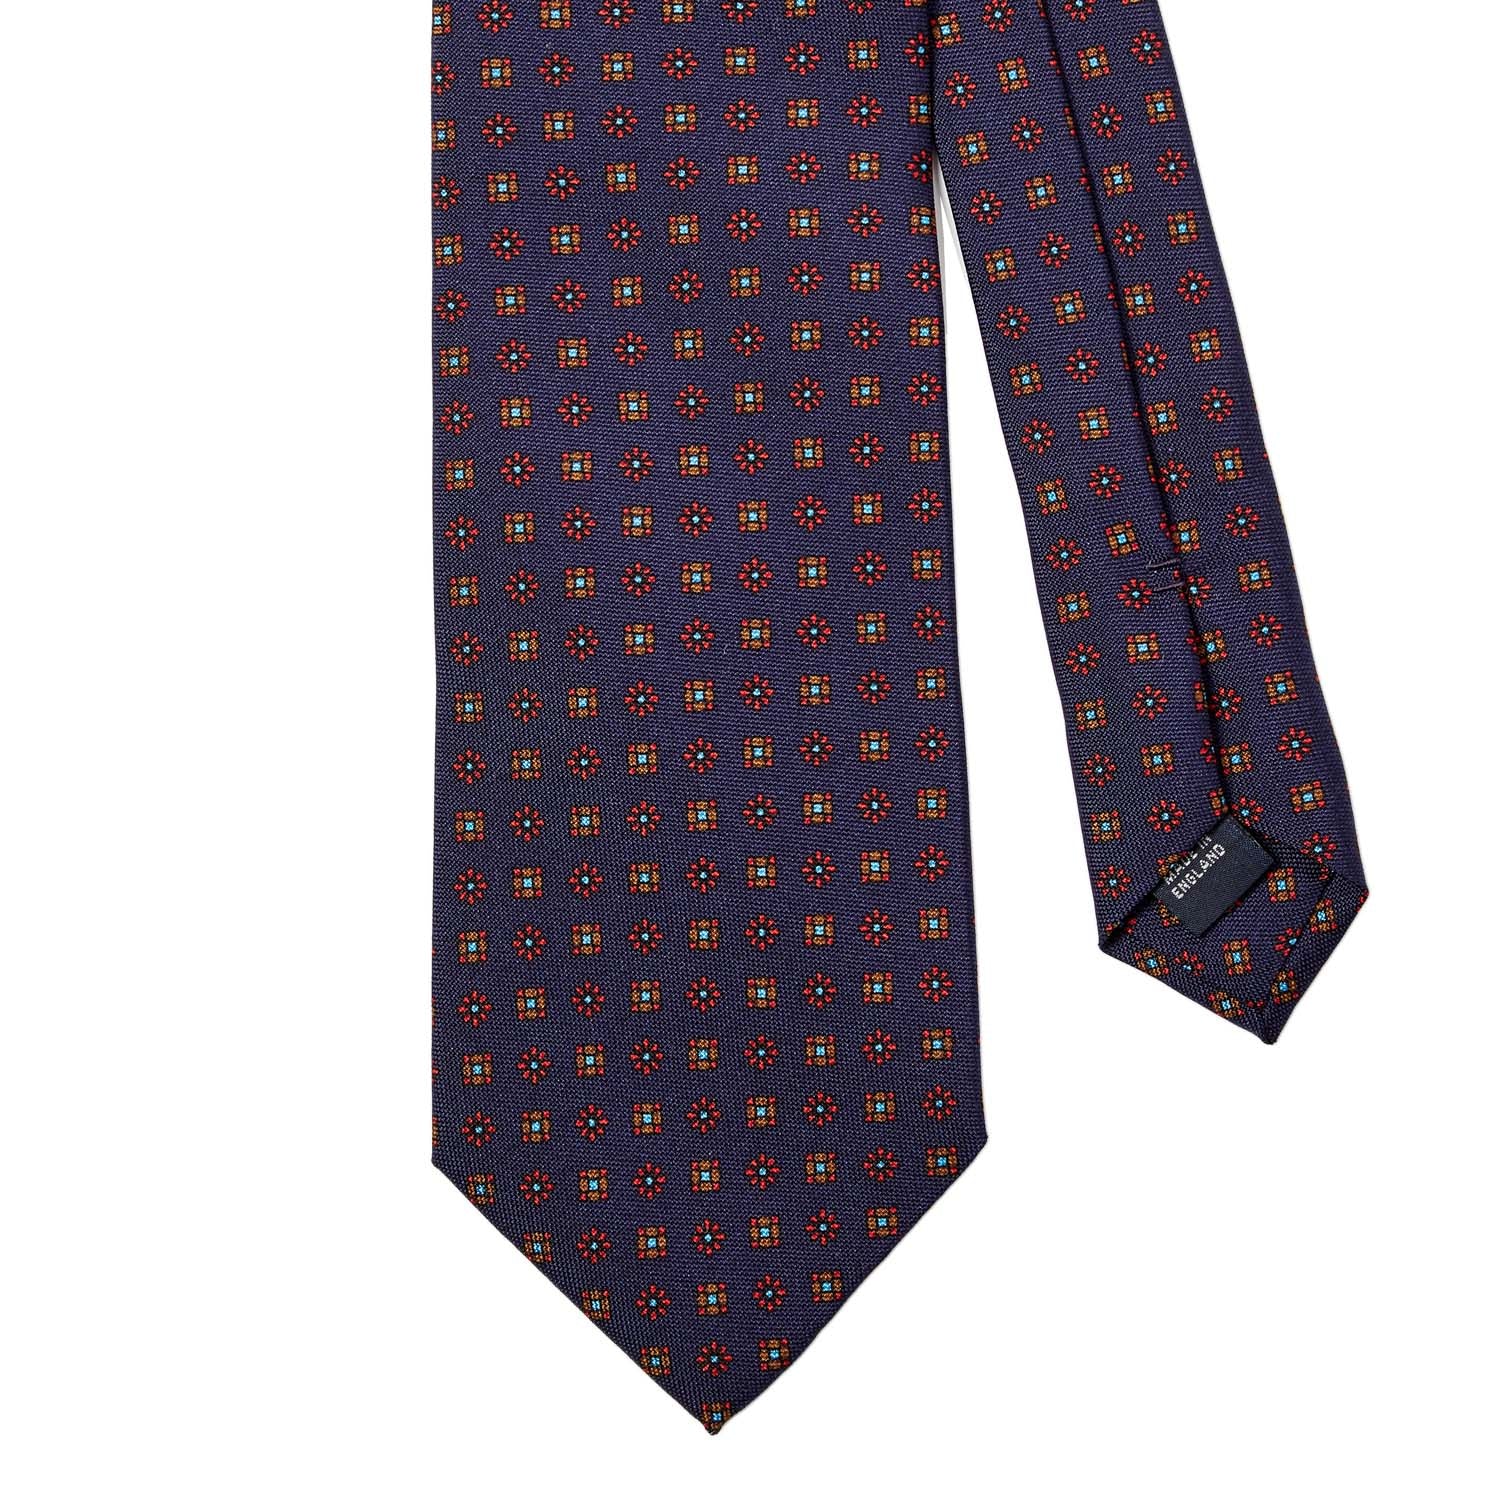 A Sovereign Grade Navy Floral 25oz Silk Hopsack Tie (150x8.5 cm) by KirbyAllison.com, with a red, orange, and blue pattern, showcasing quality craftsmanship.